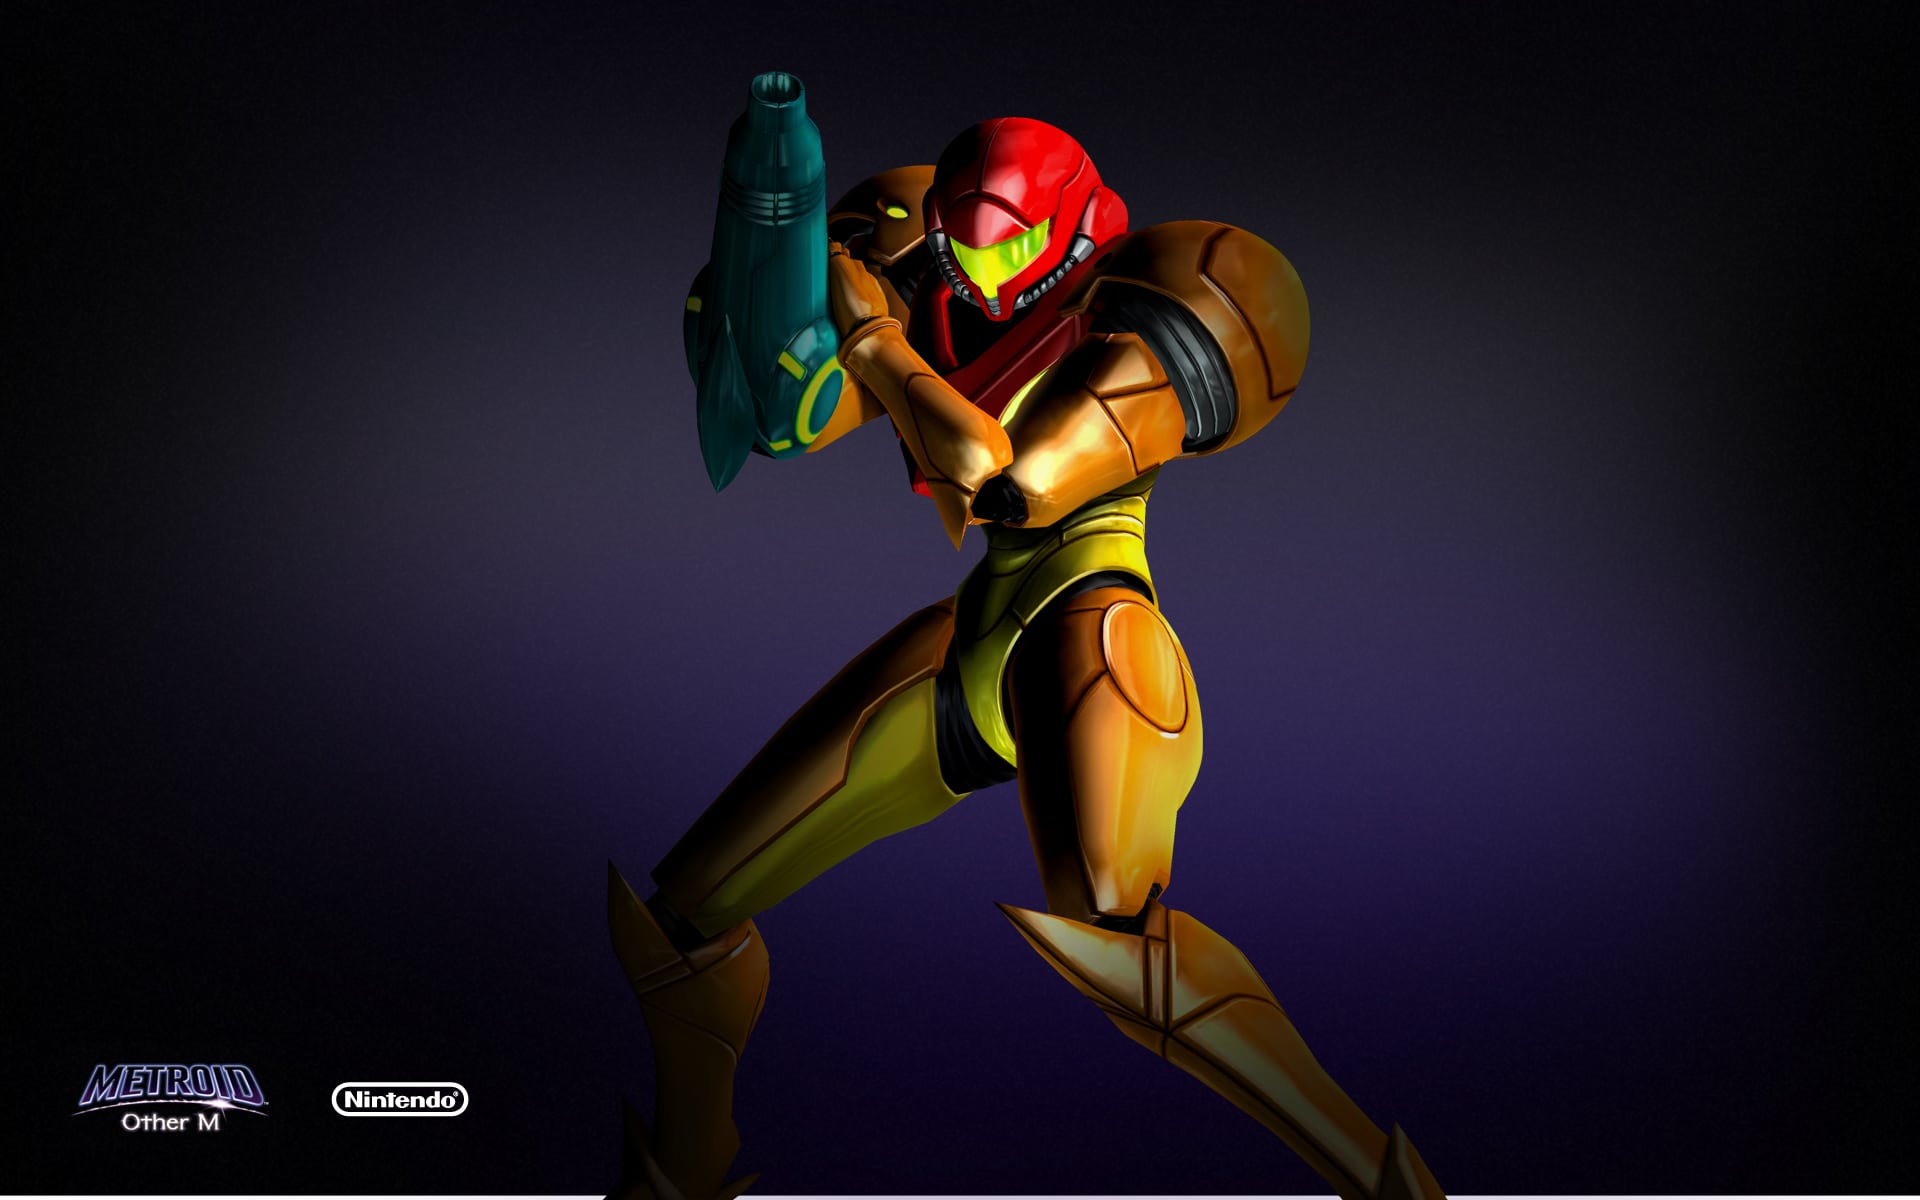 metroid other m canon download free